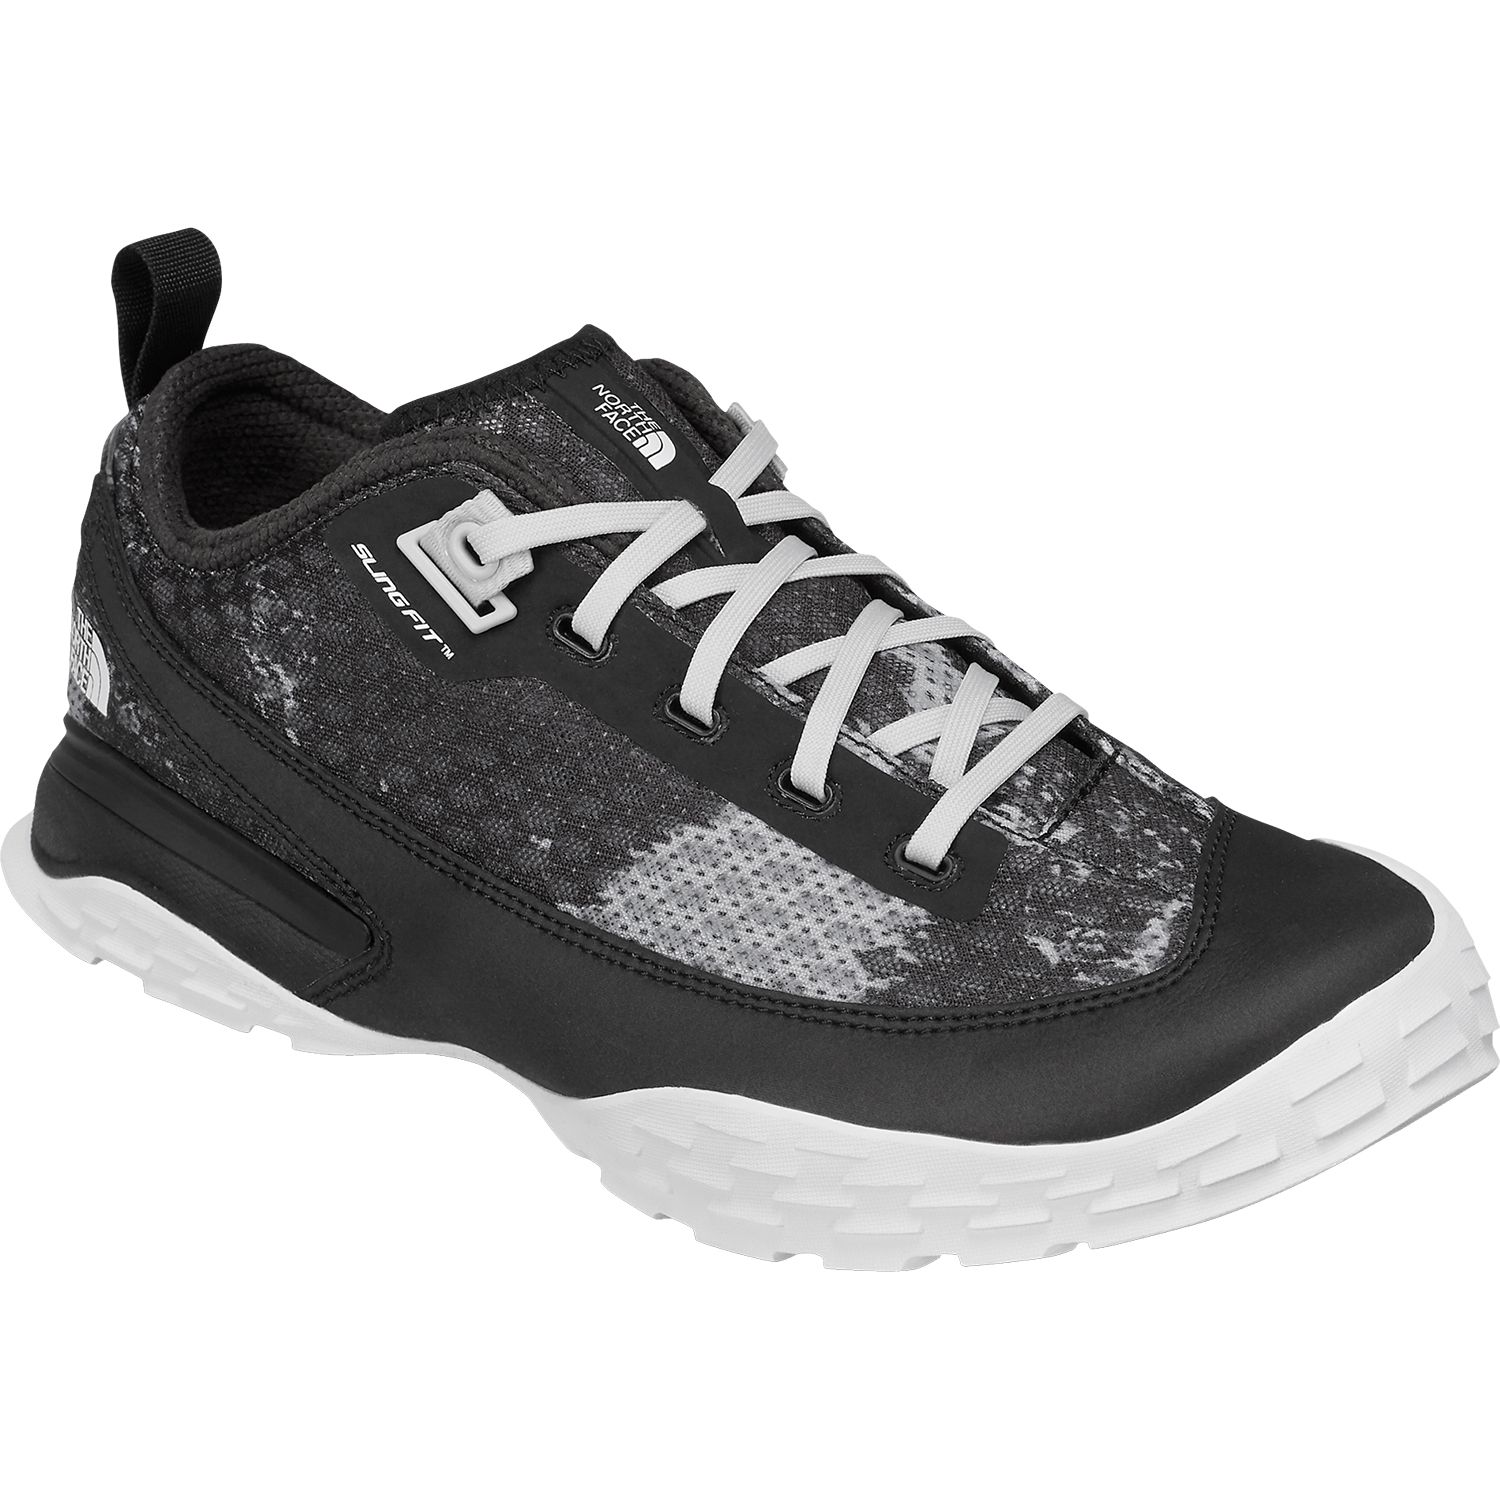 north face one trail shoe